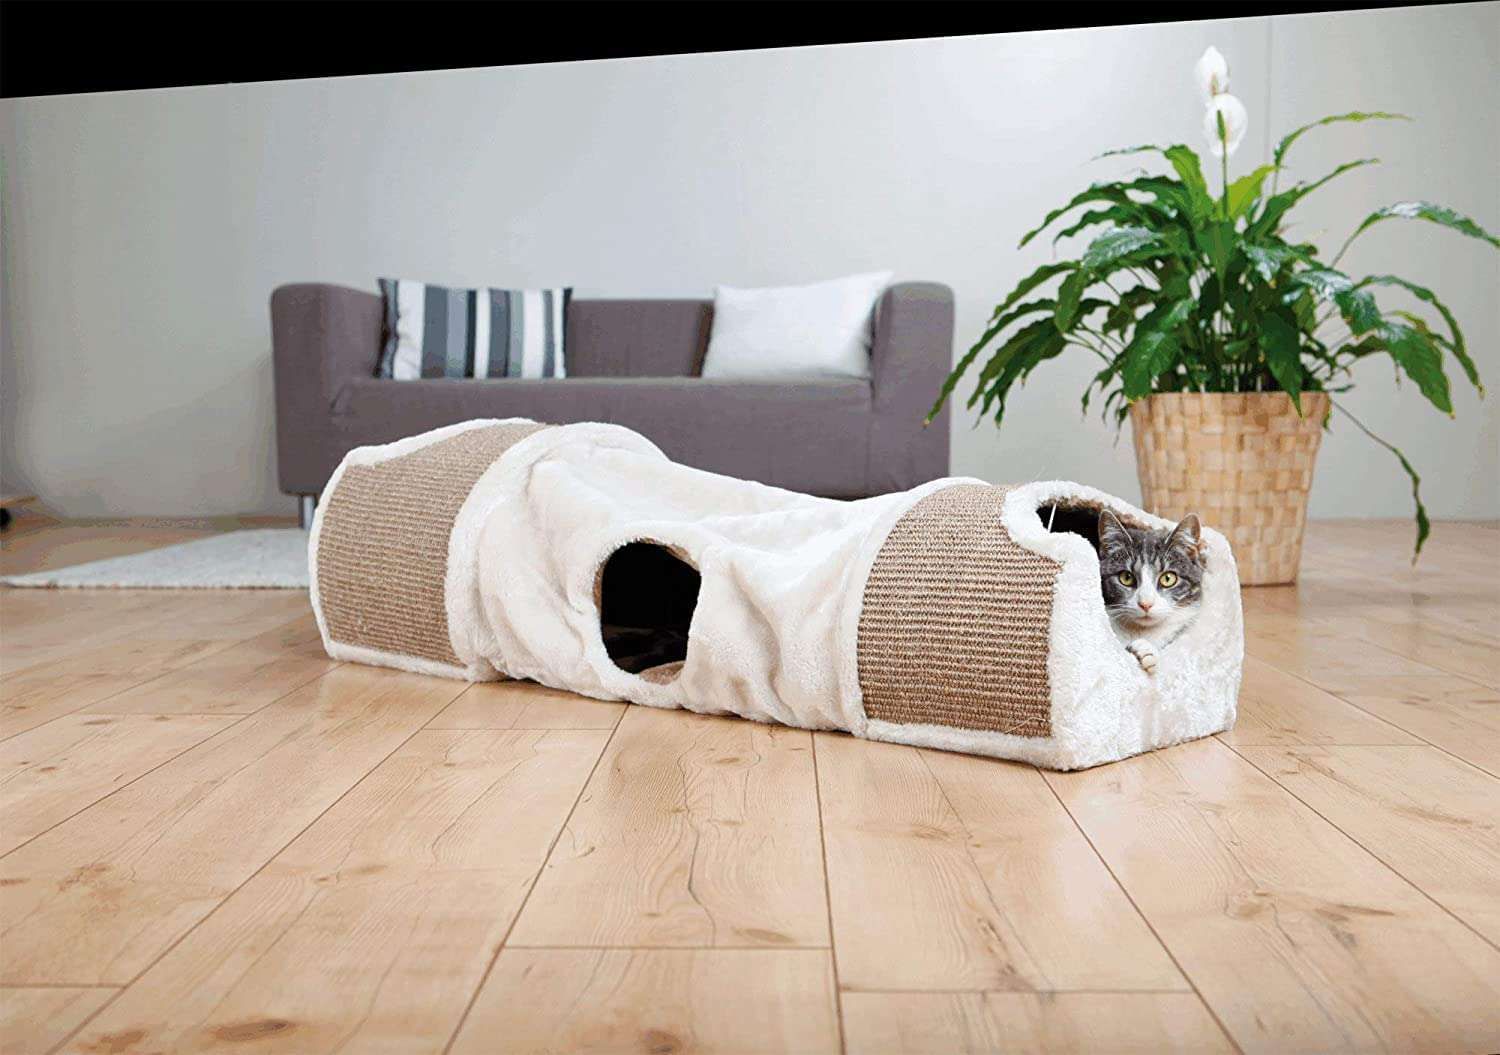 Best products for your pet, Press profile homify Press profile homify Otros espacios